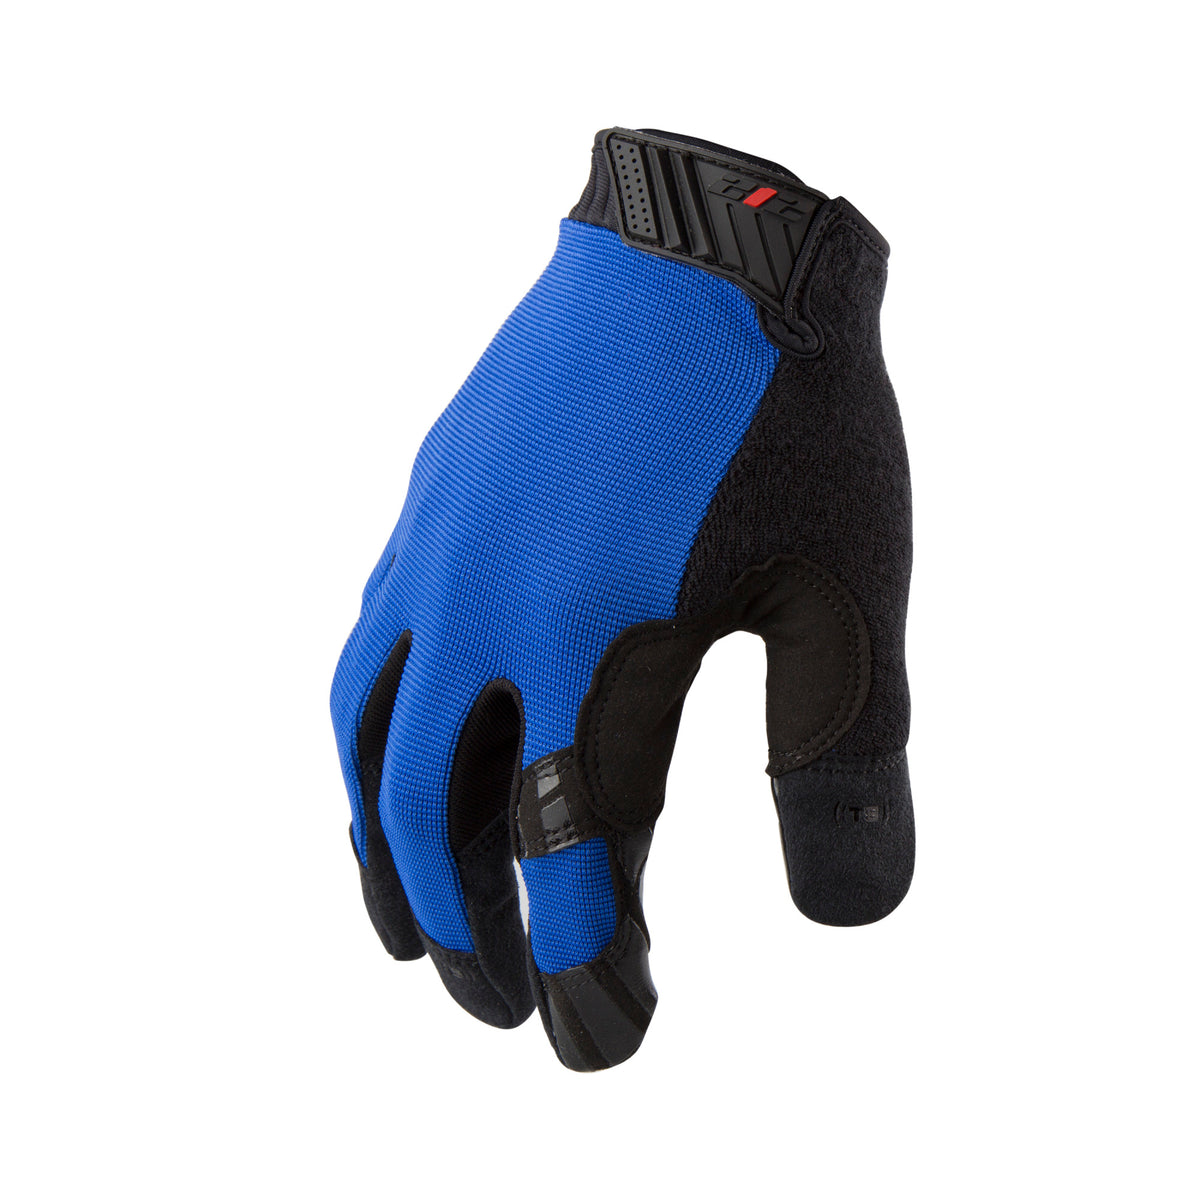 Sticky Glove Silicone Tread Grip Mechanic's Glove with TPR Knuckle Bumper, M